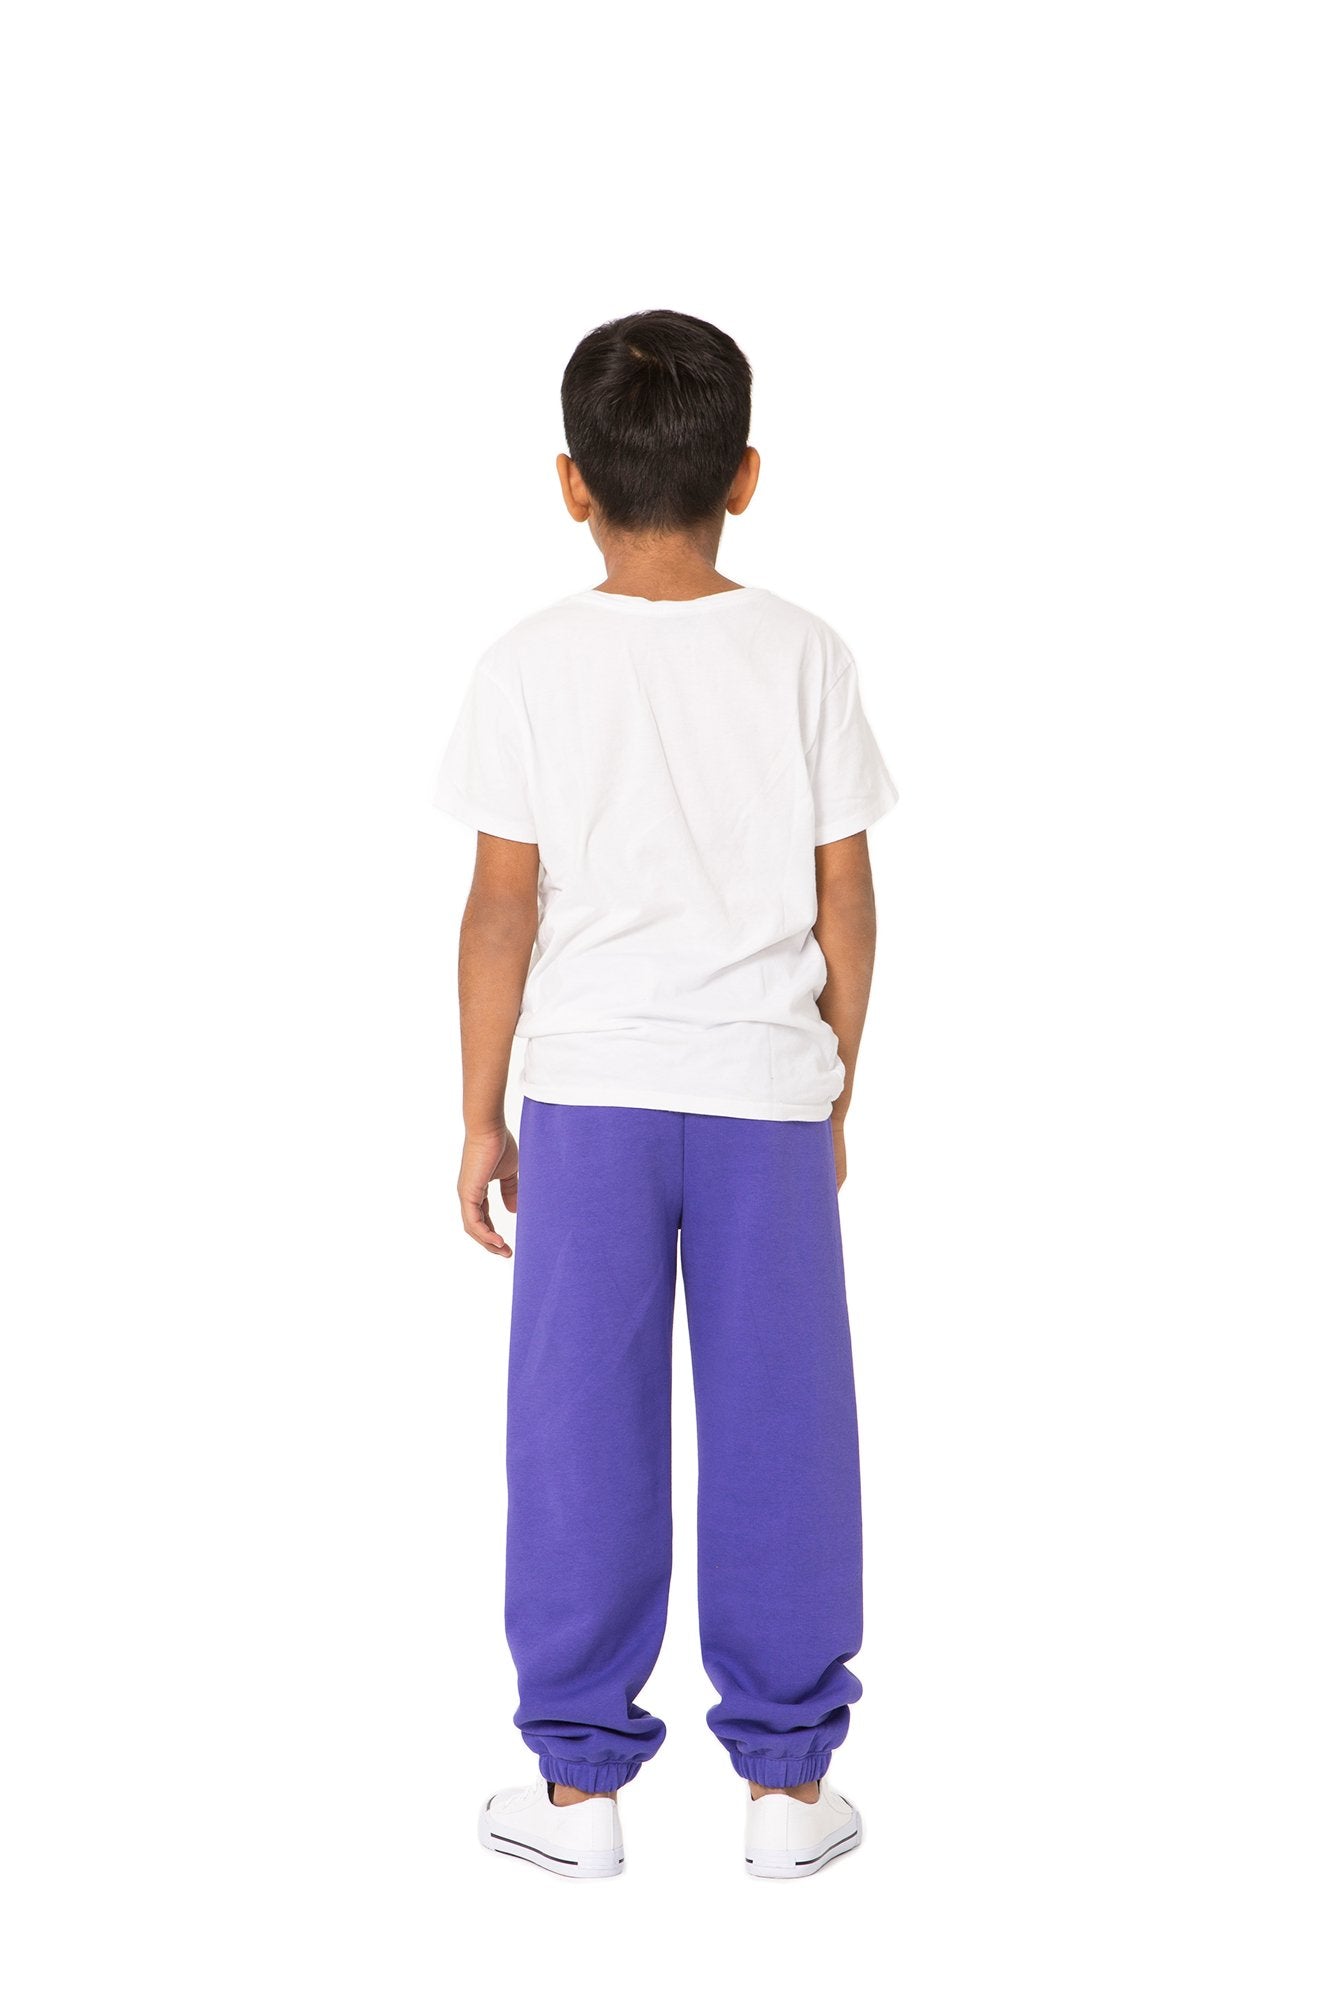 Niki Original for boys from Lazypants - always a great buy at a reasonable price.